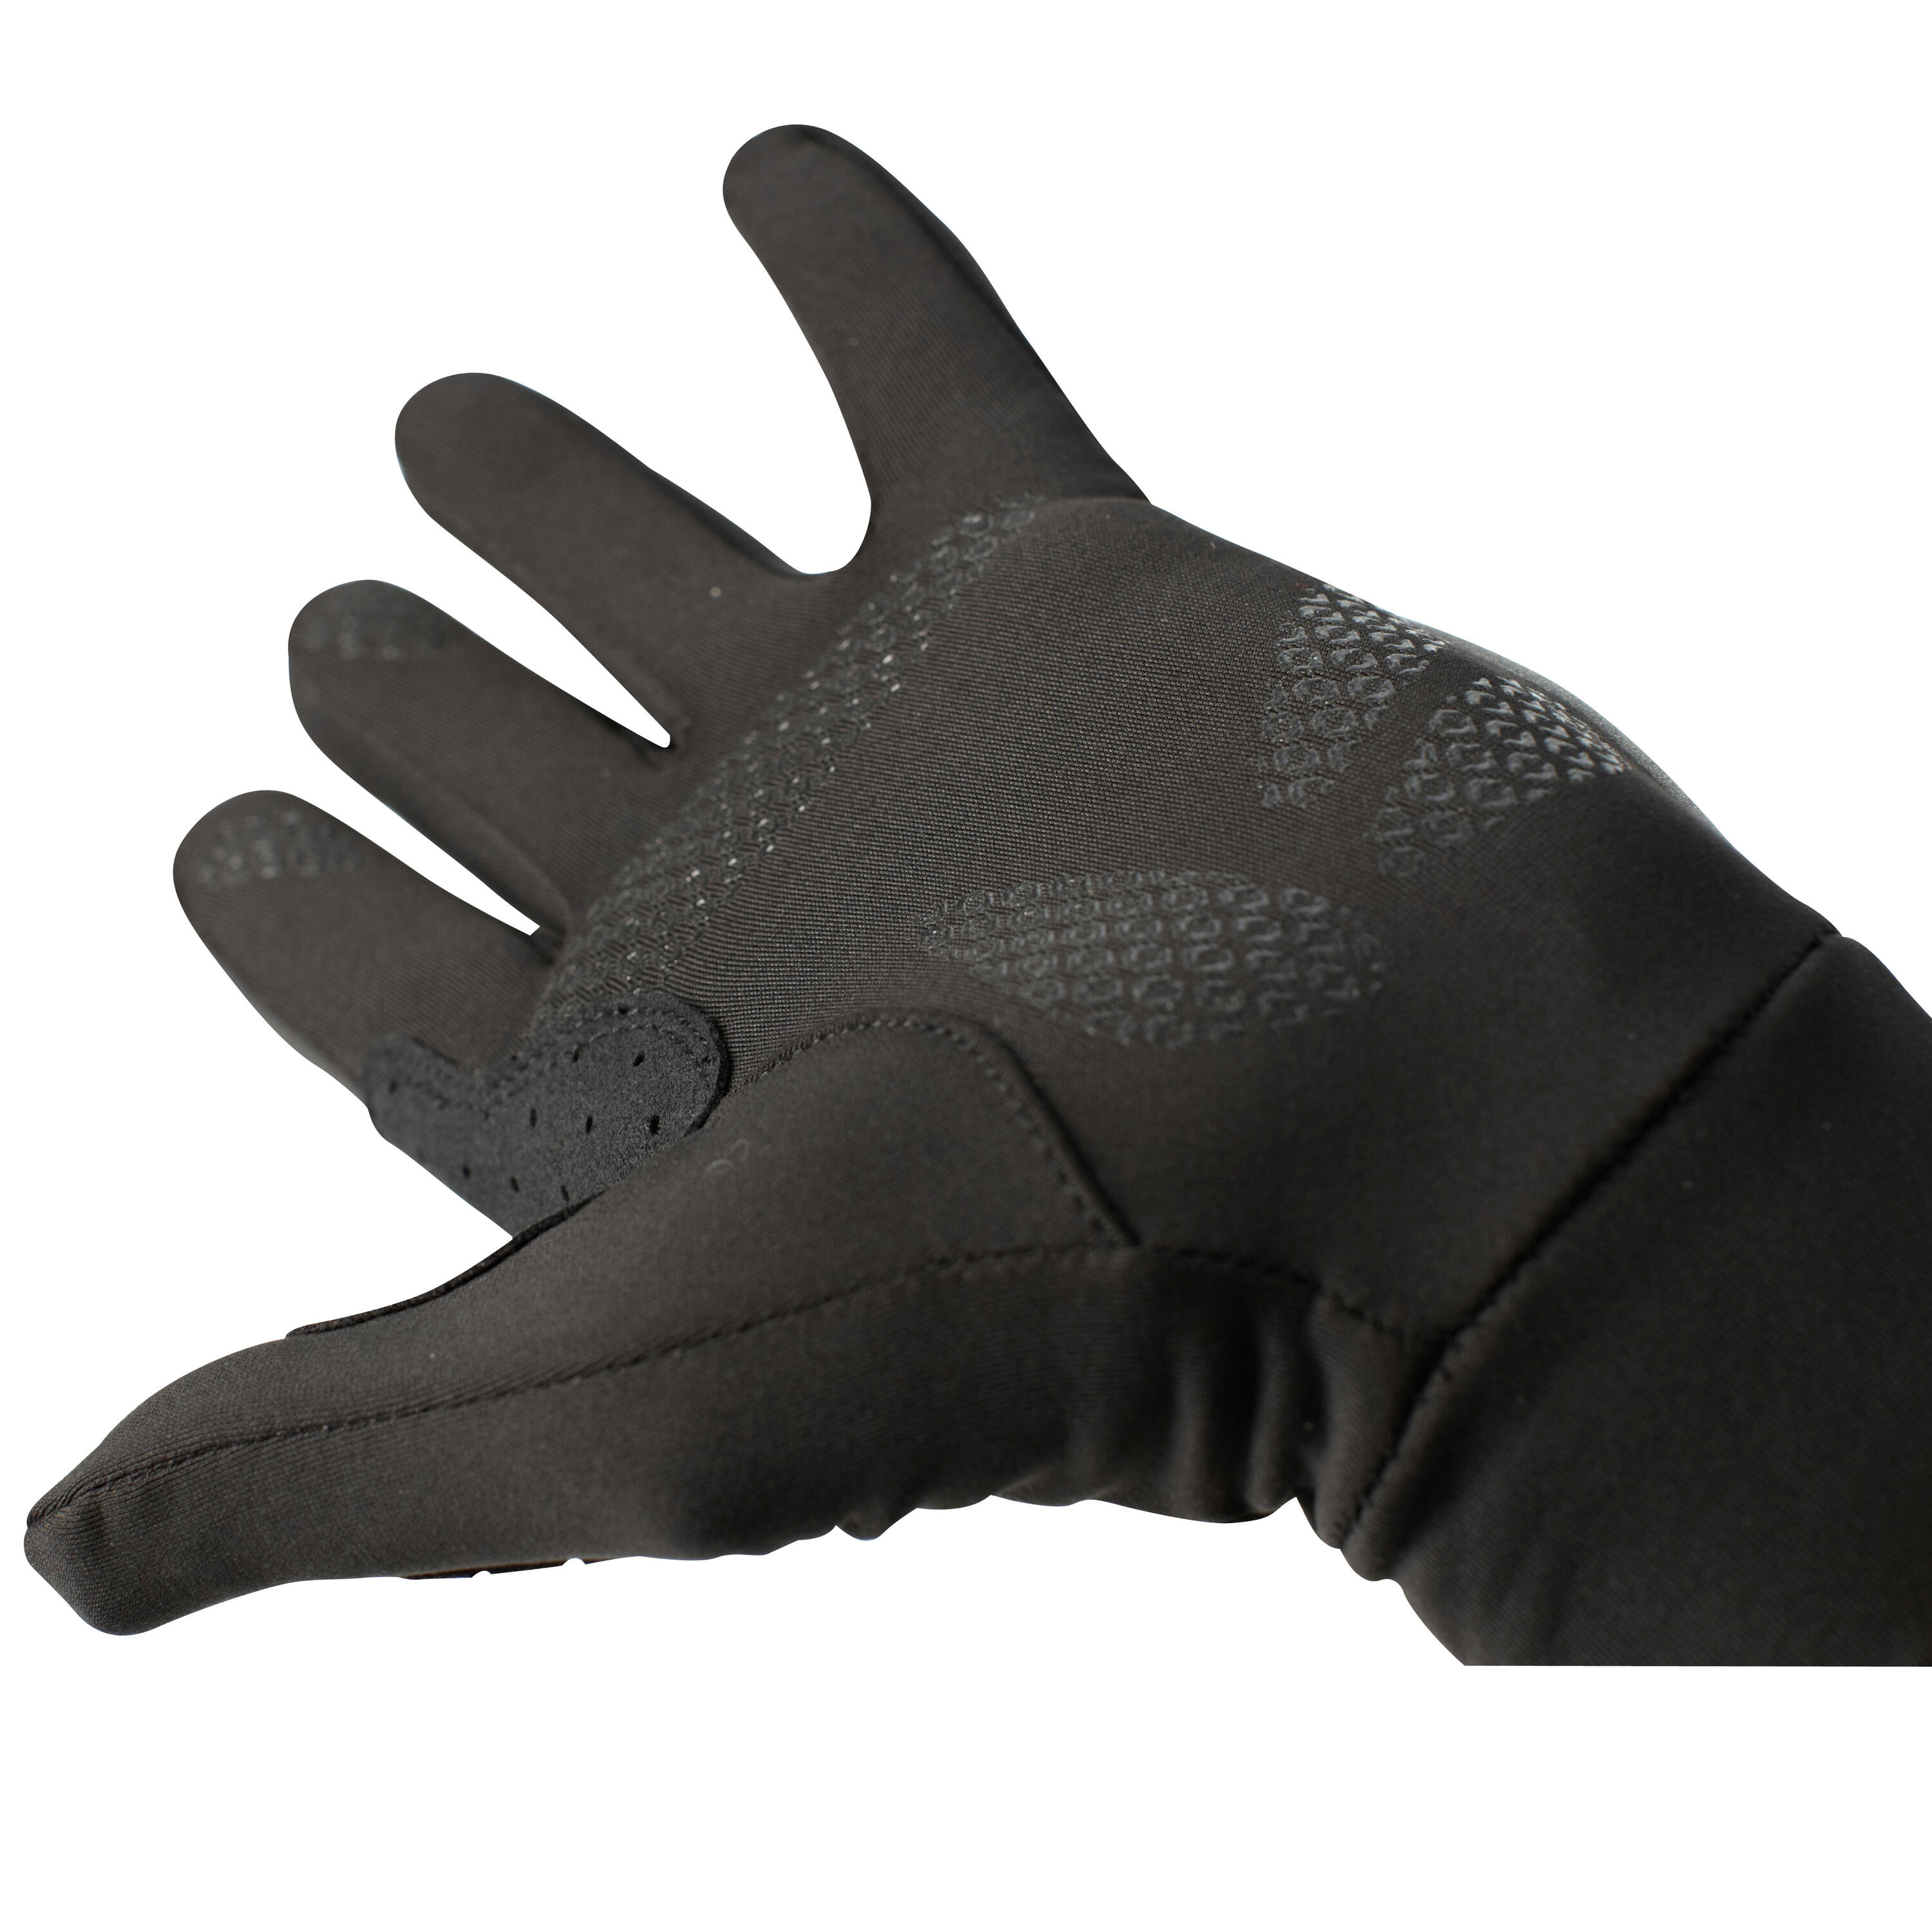 320 Winter Cycling Gloves - Black 4/5